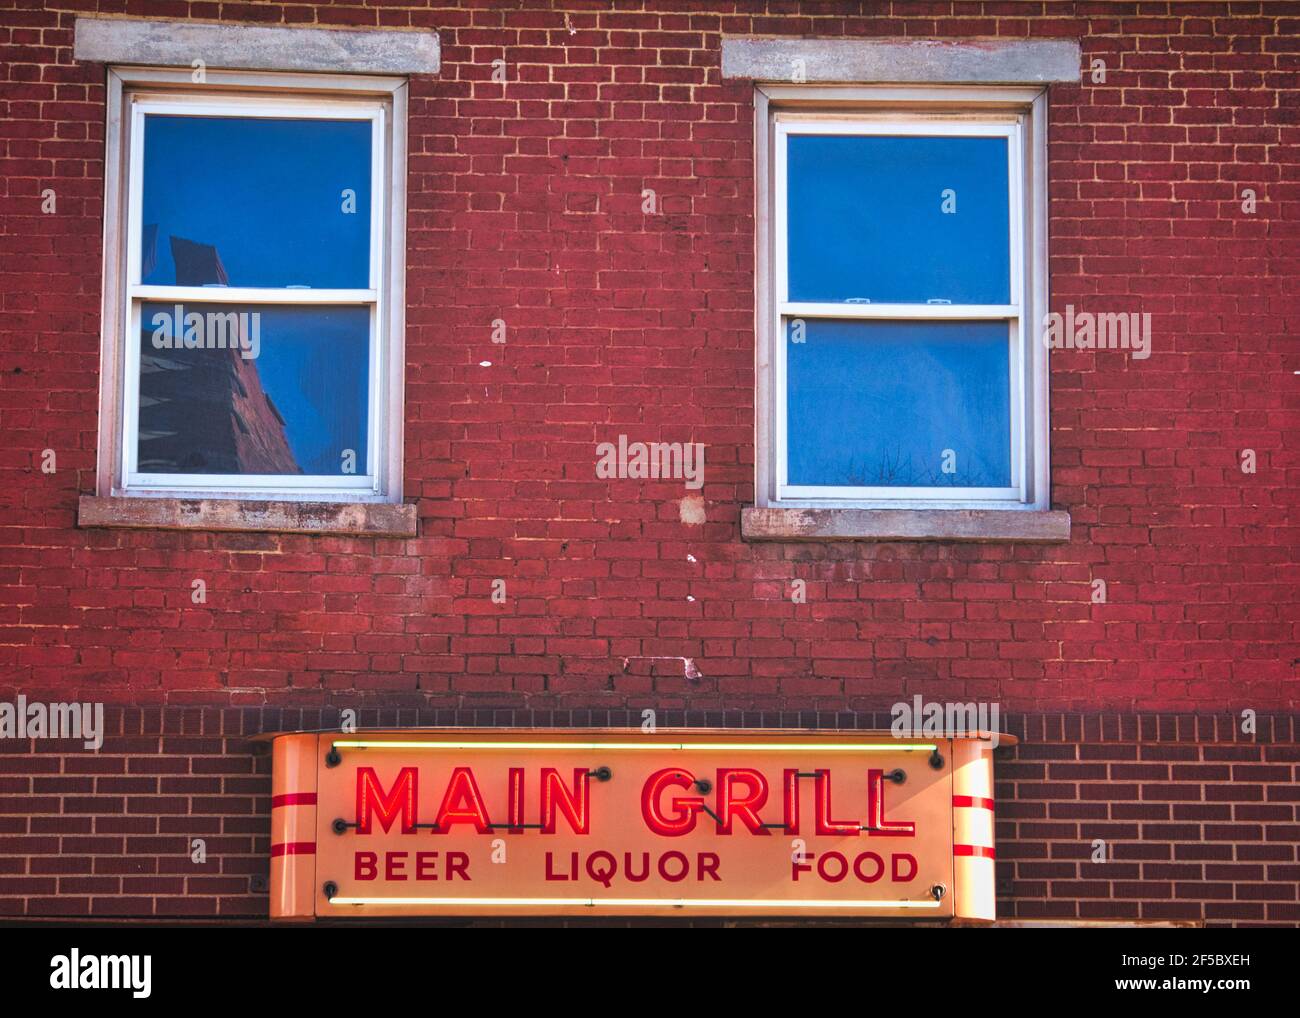 Main Grill neon sing on brick building Stock Photo